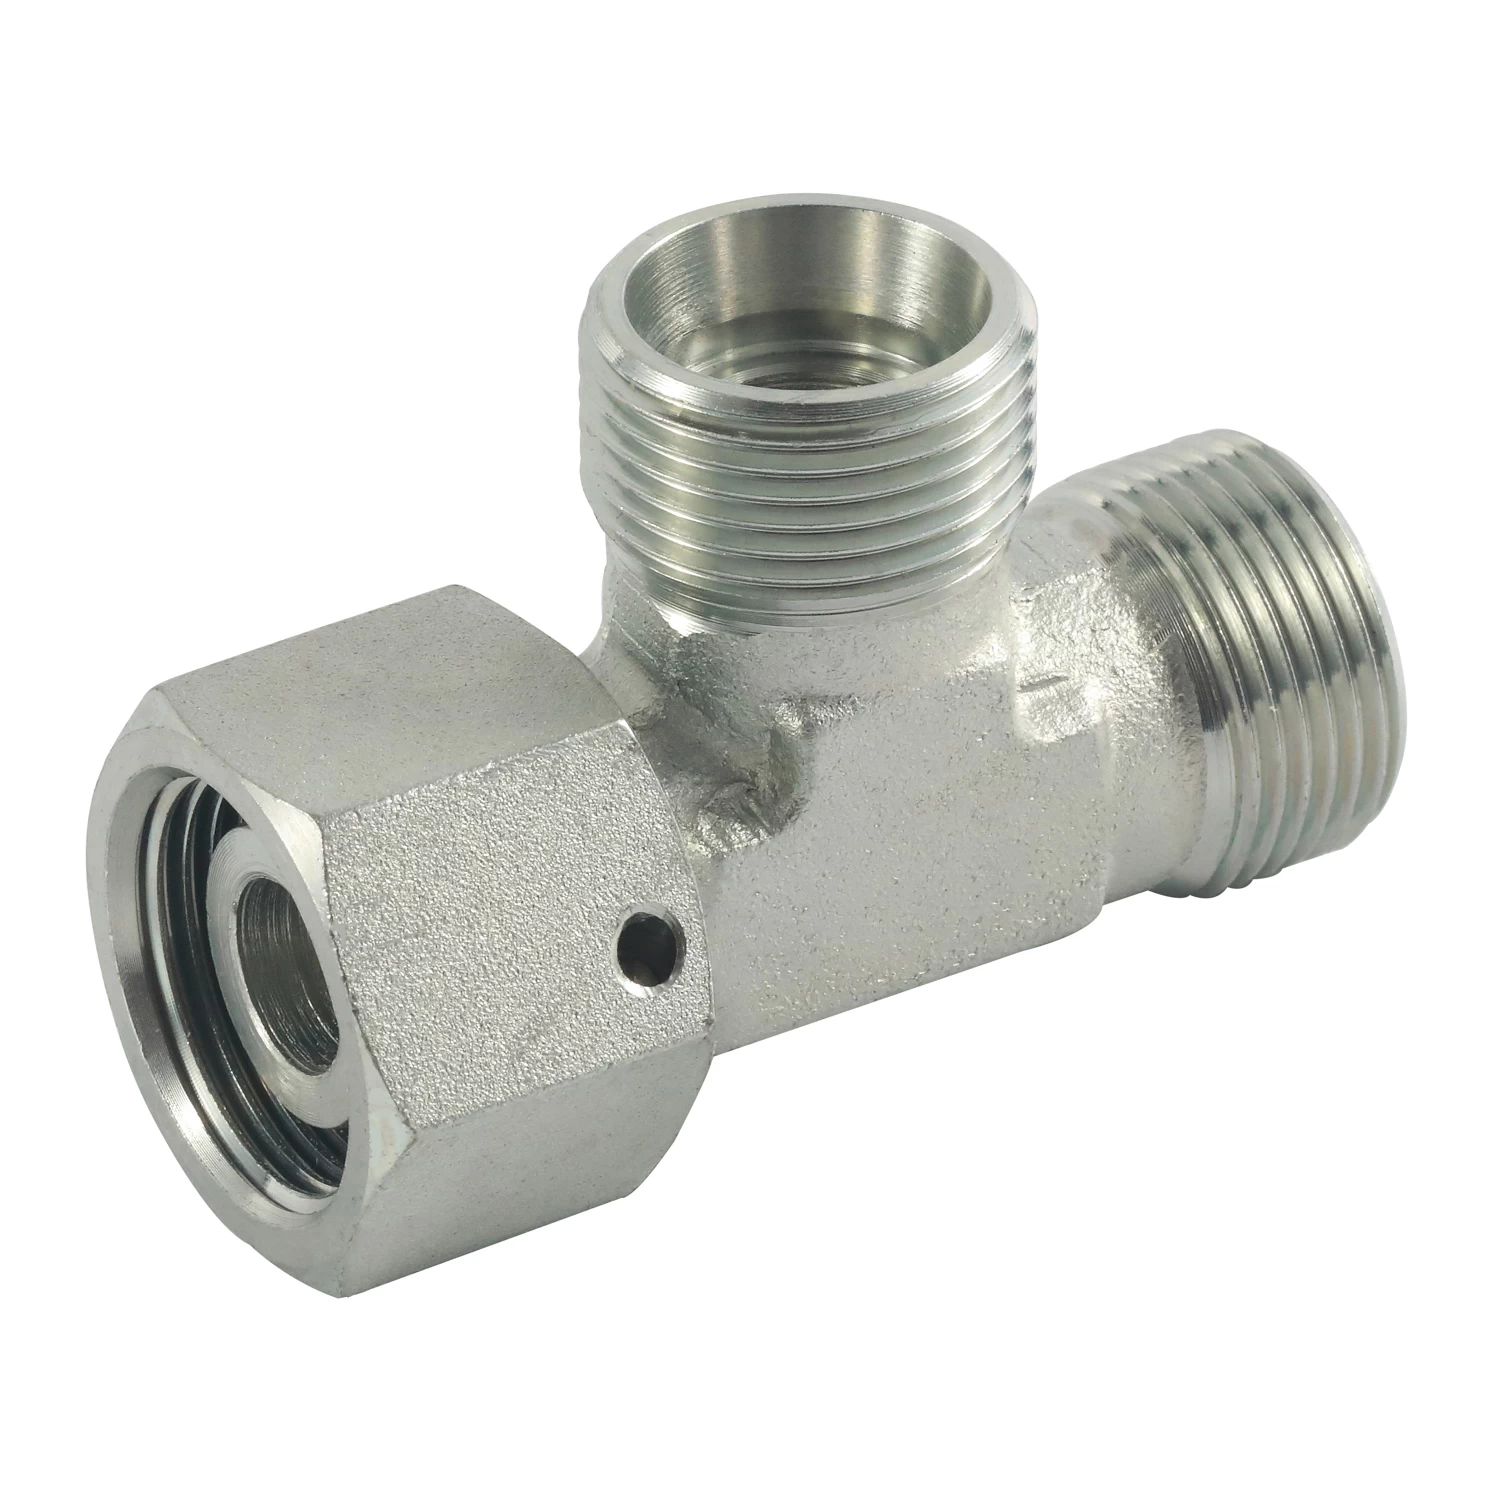 China CC run tee fittings with swivel nut tube fittings Hersteller